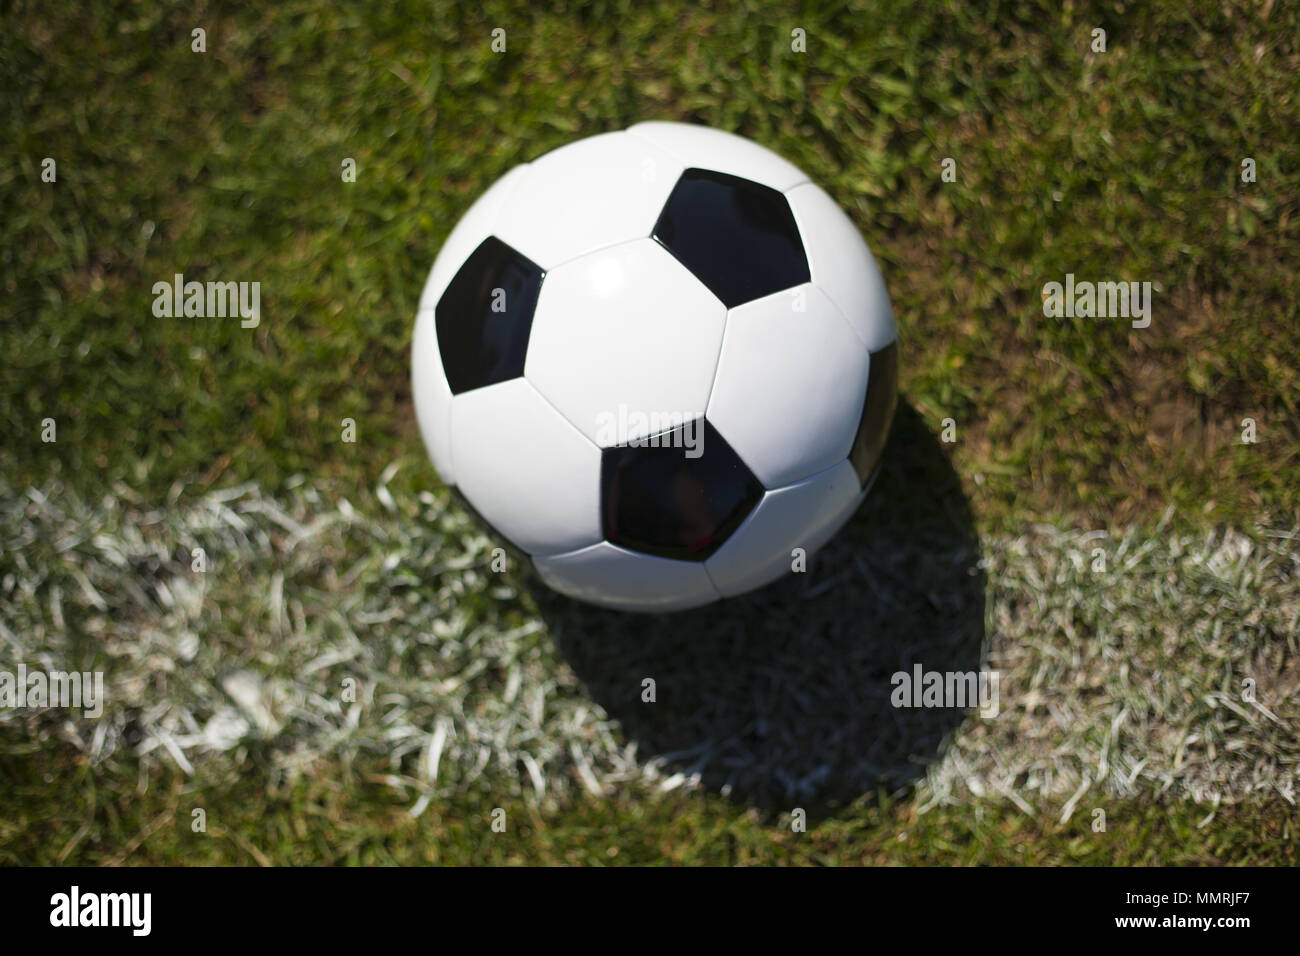 A black and white football on grass with a white line Stock Photo